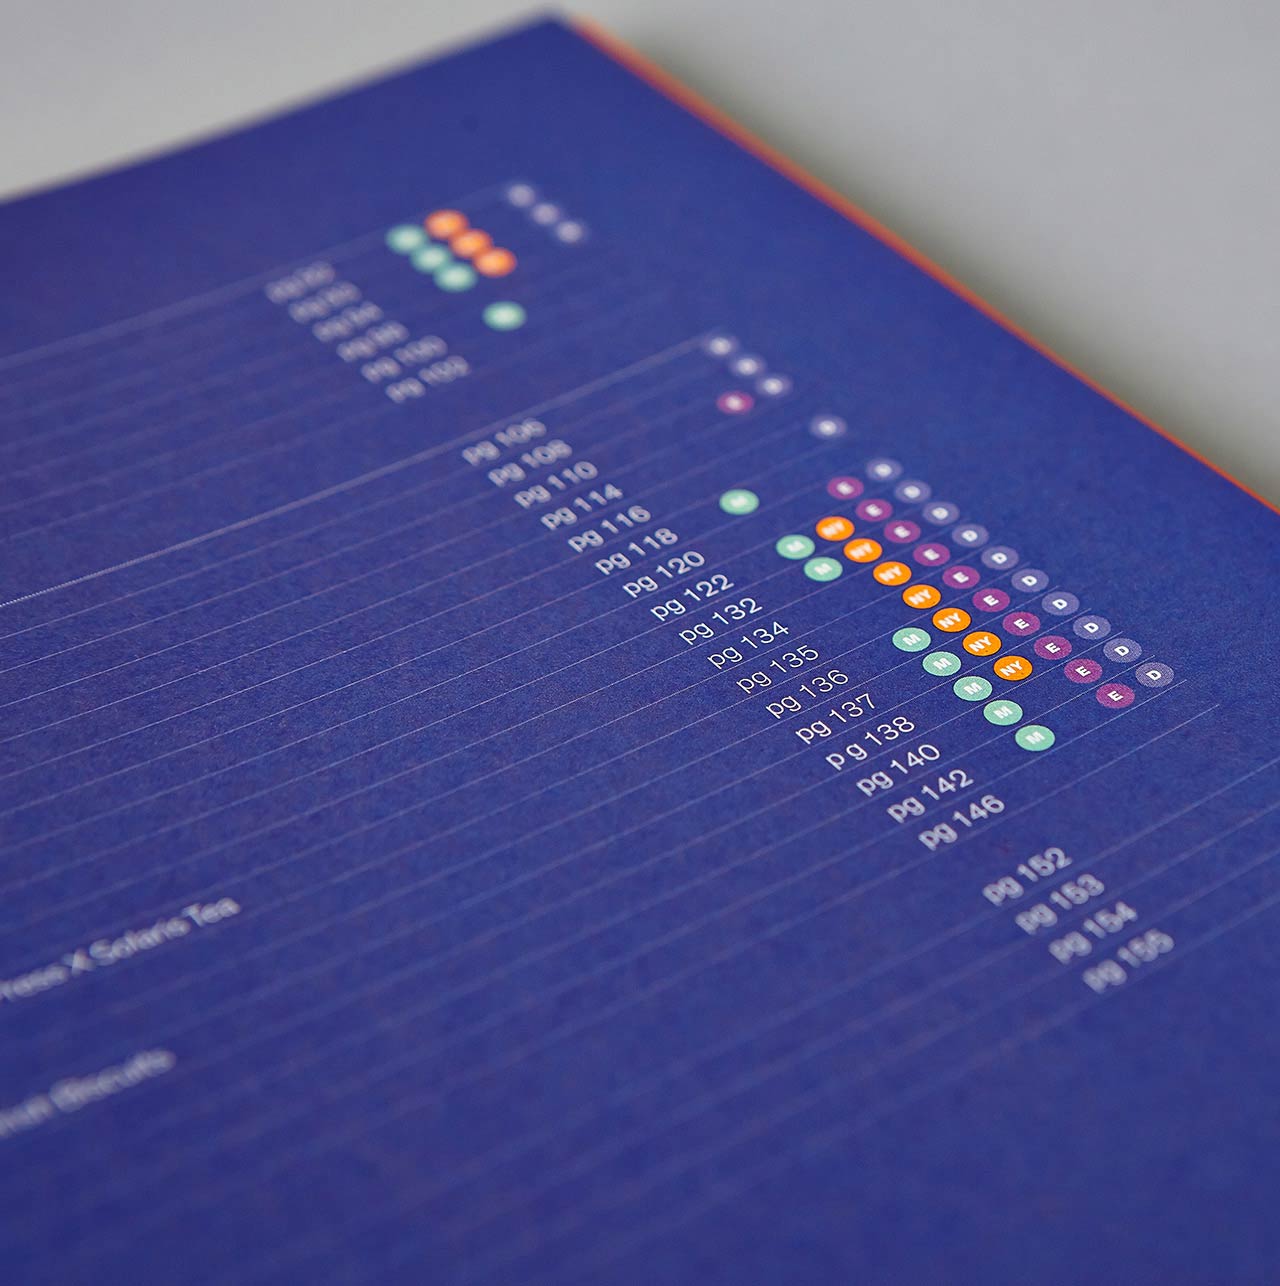 Image of the Liminal Catalogue by New Graphic